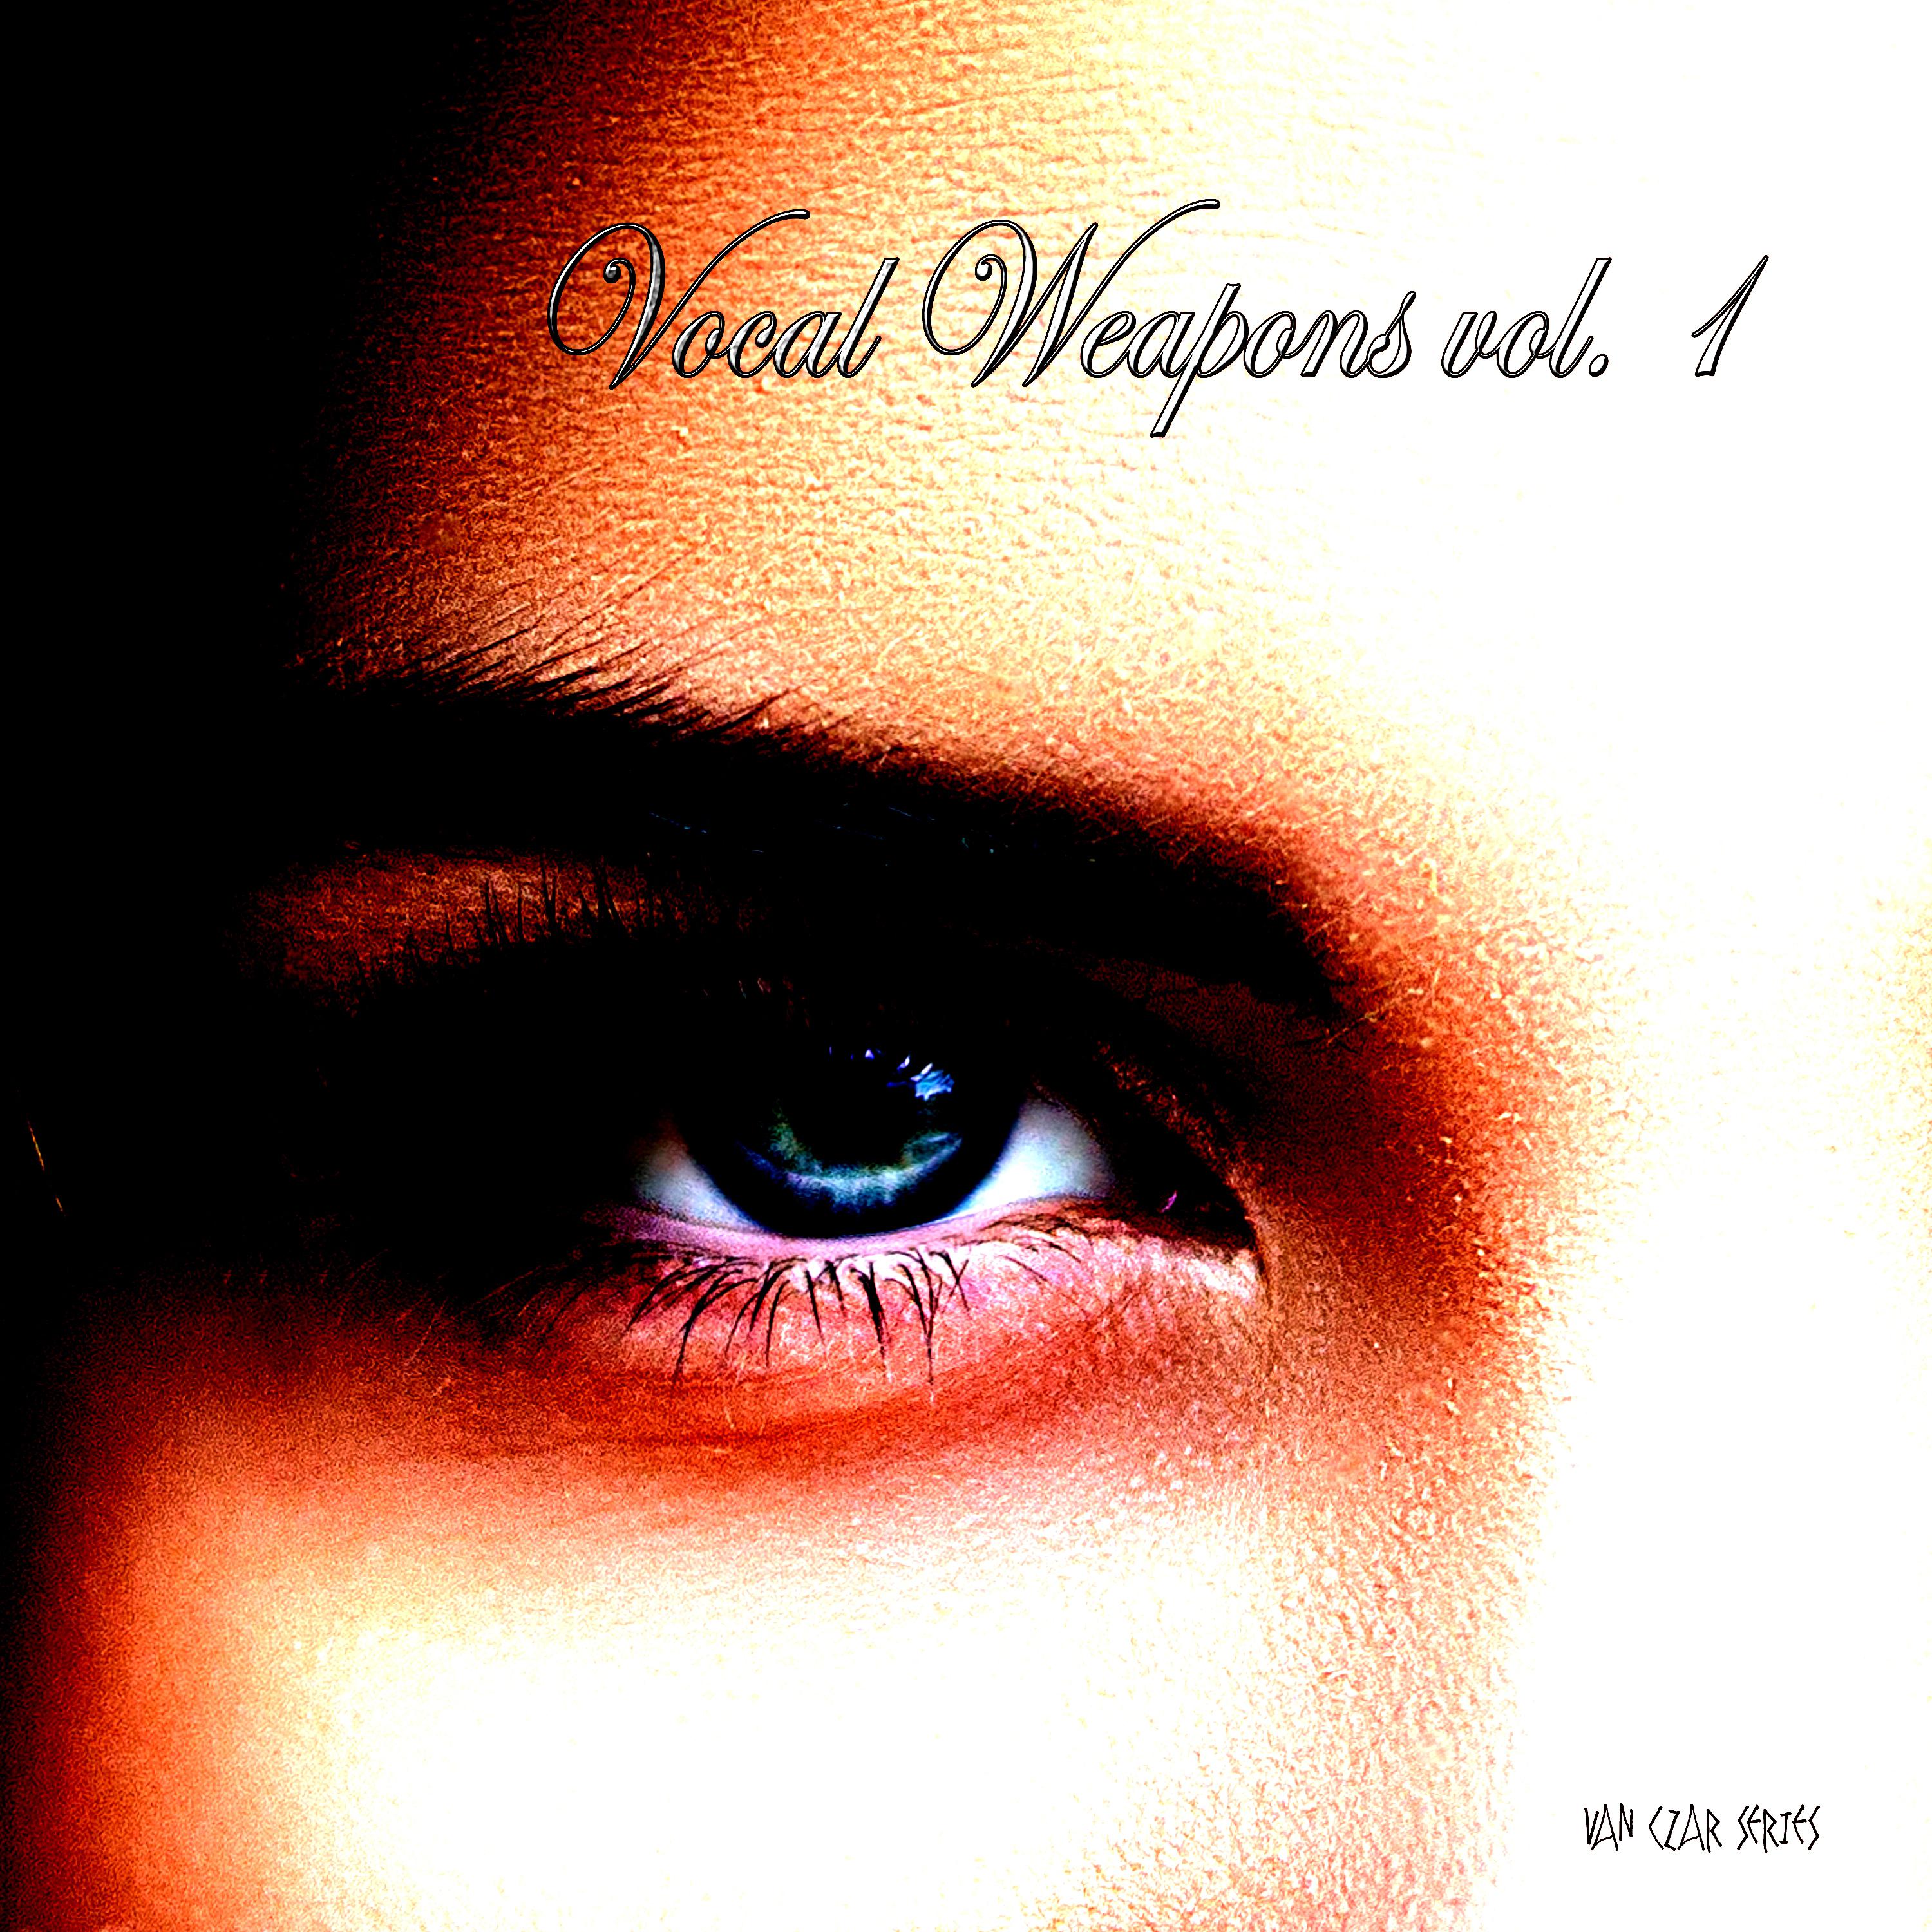 Vocal Club Weapons, Vol. 1 (Selected & Mixed By Disco Van)